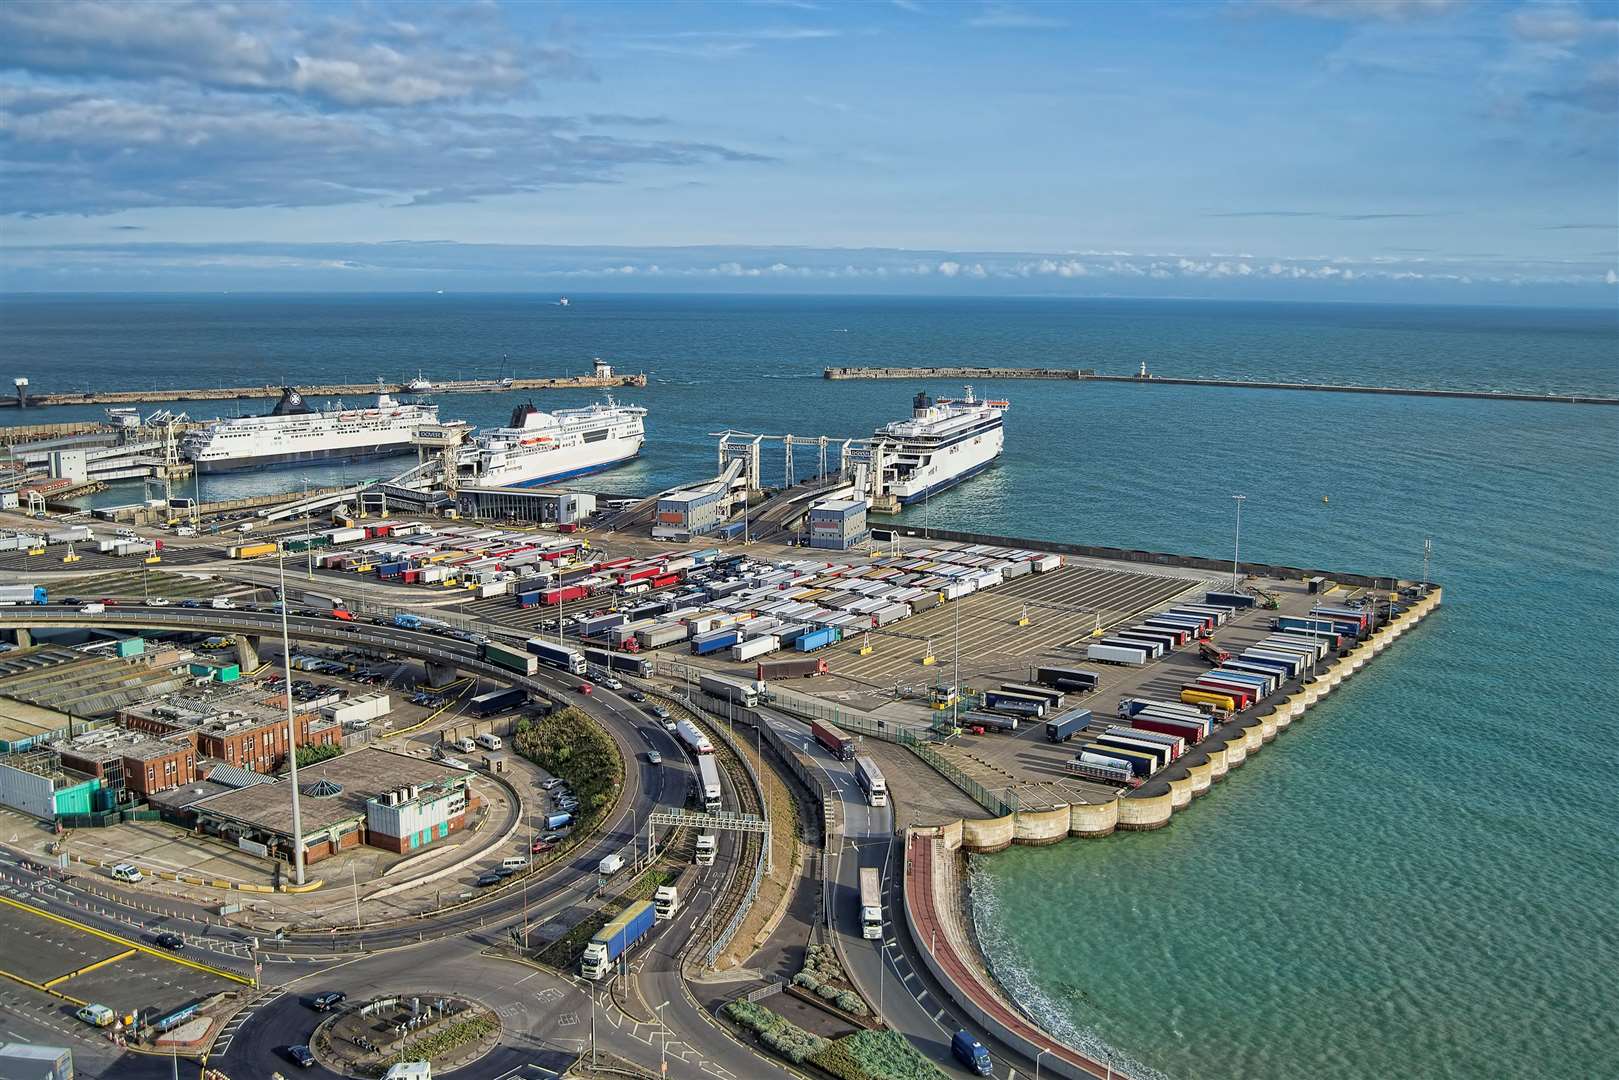 There are delays getting into Dover port this morning